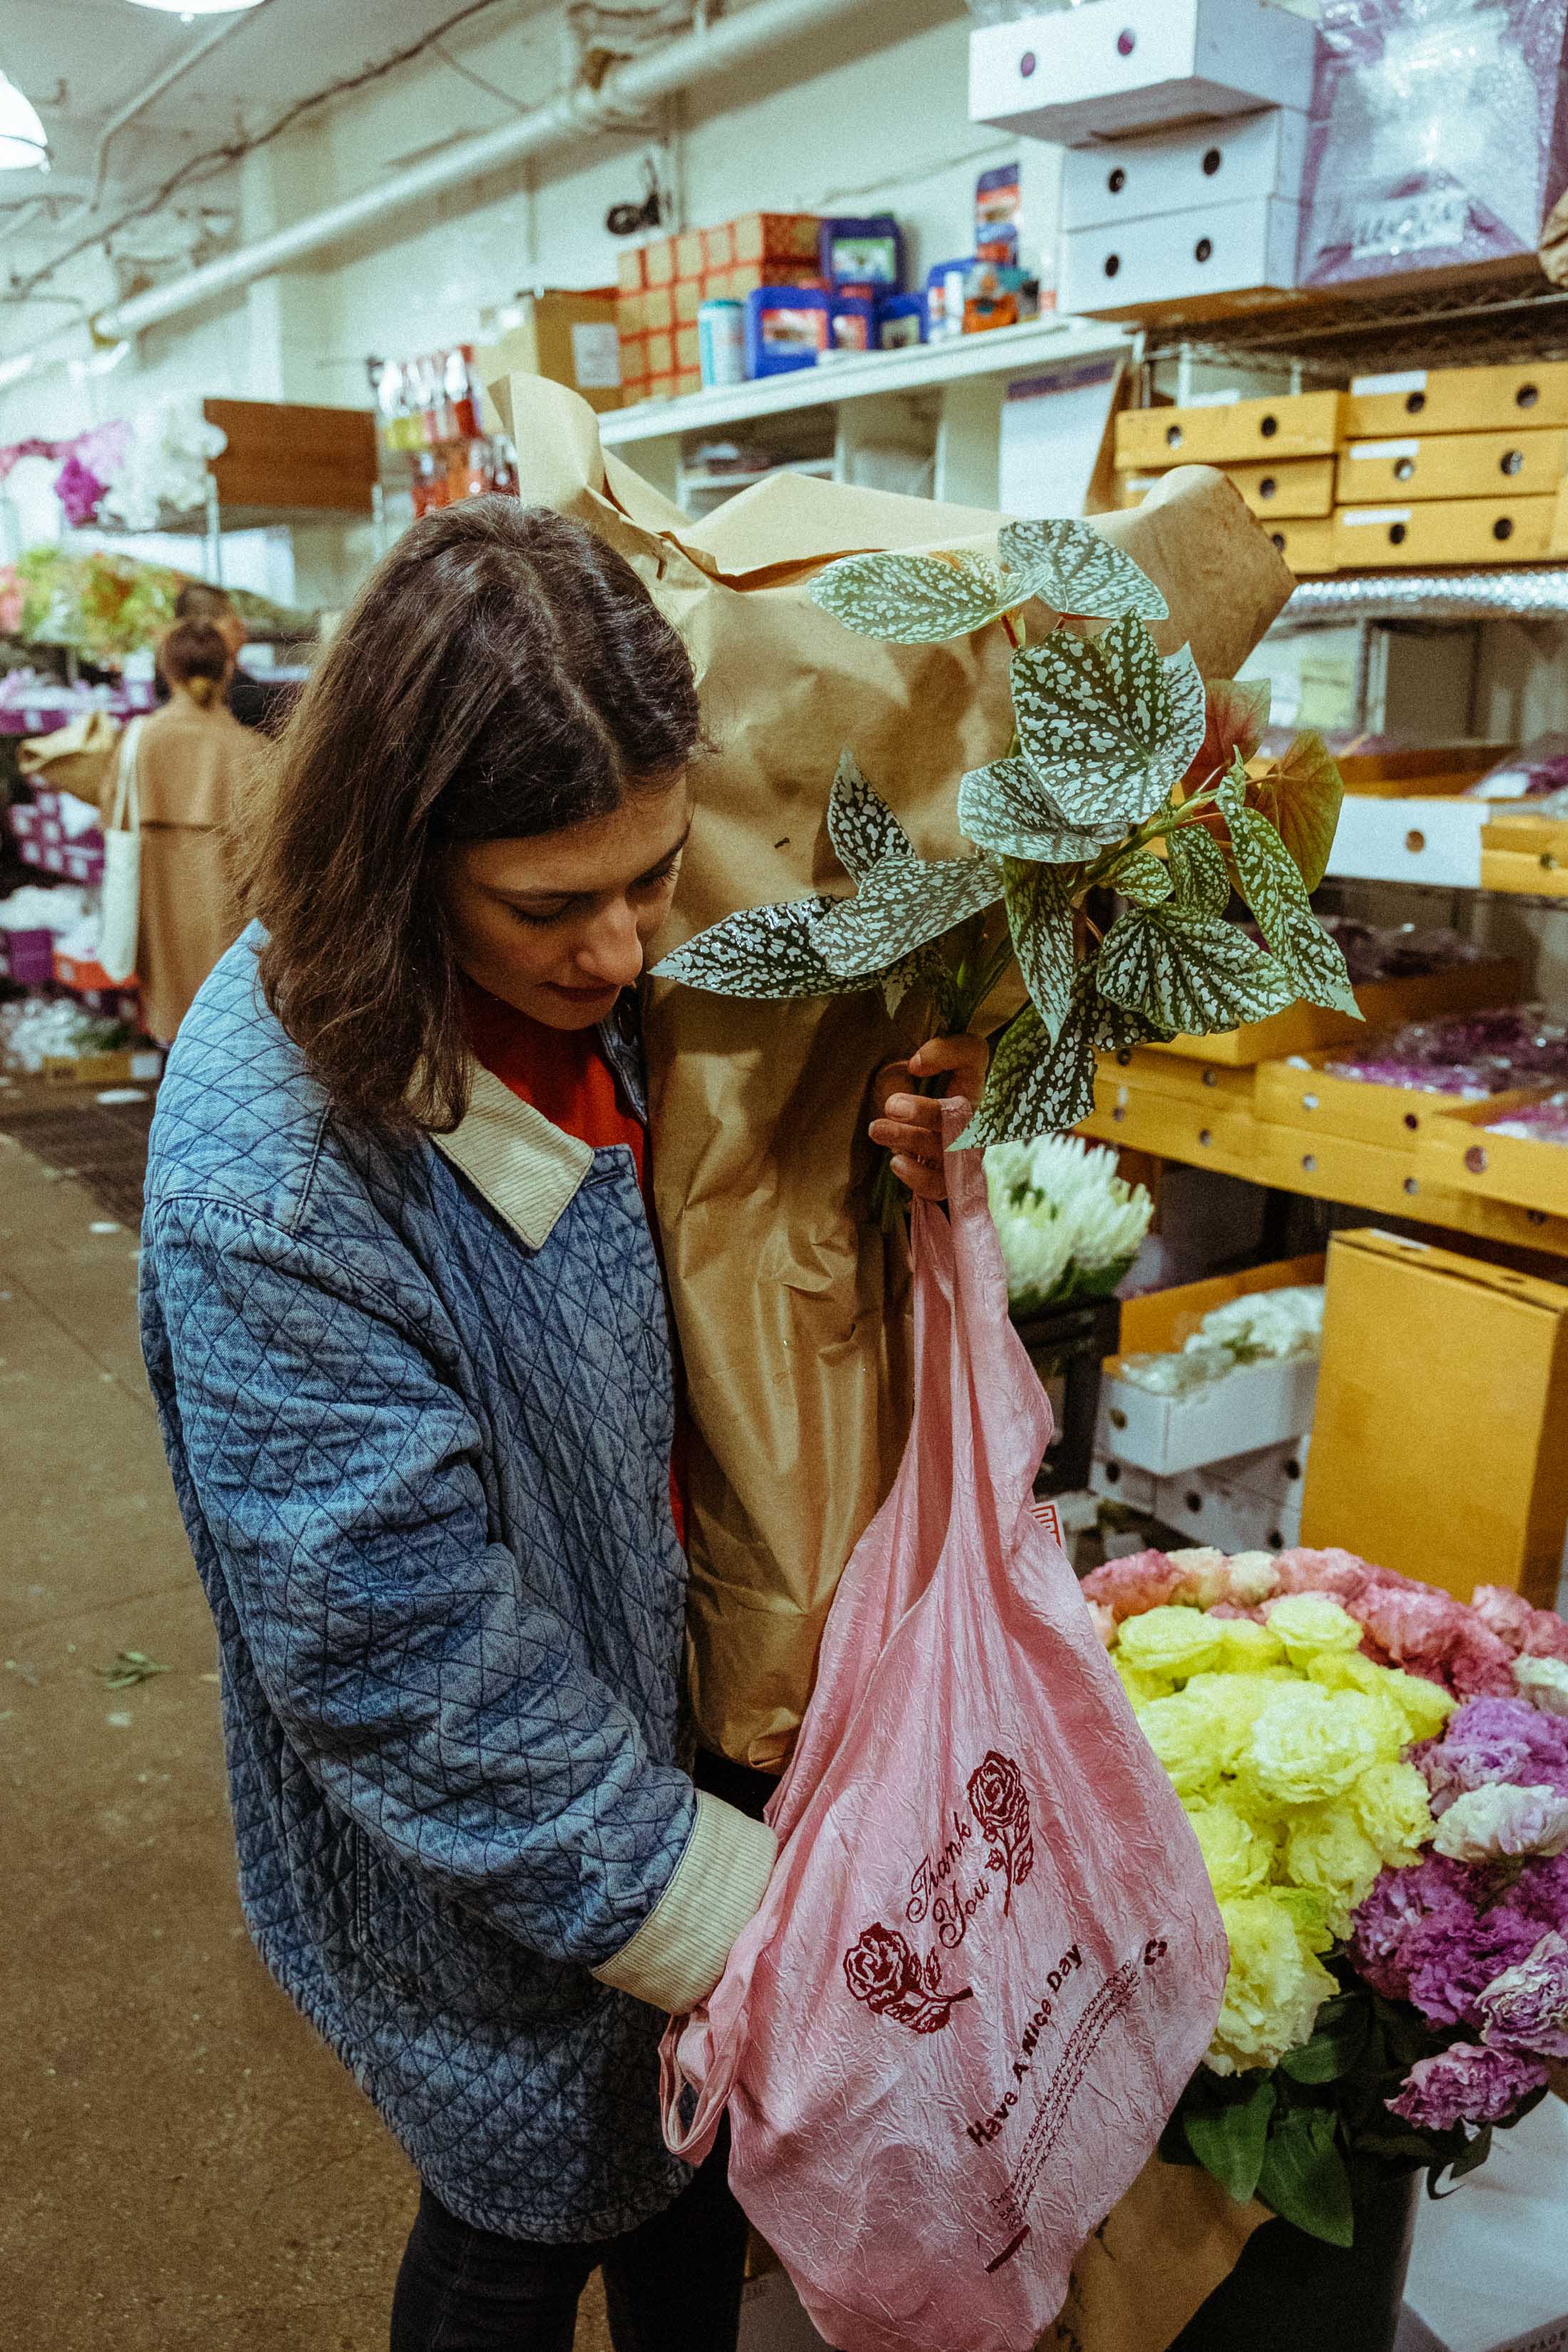 New York based florist Brittany Asch of Brrch Floral